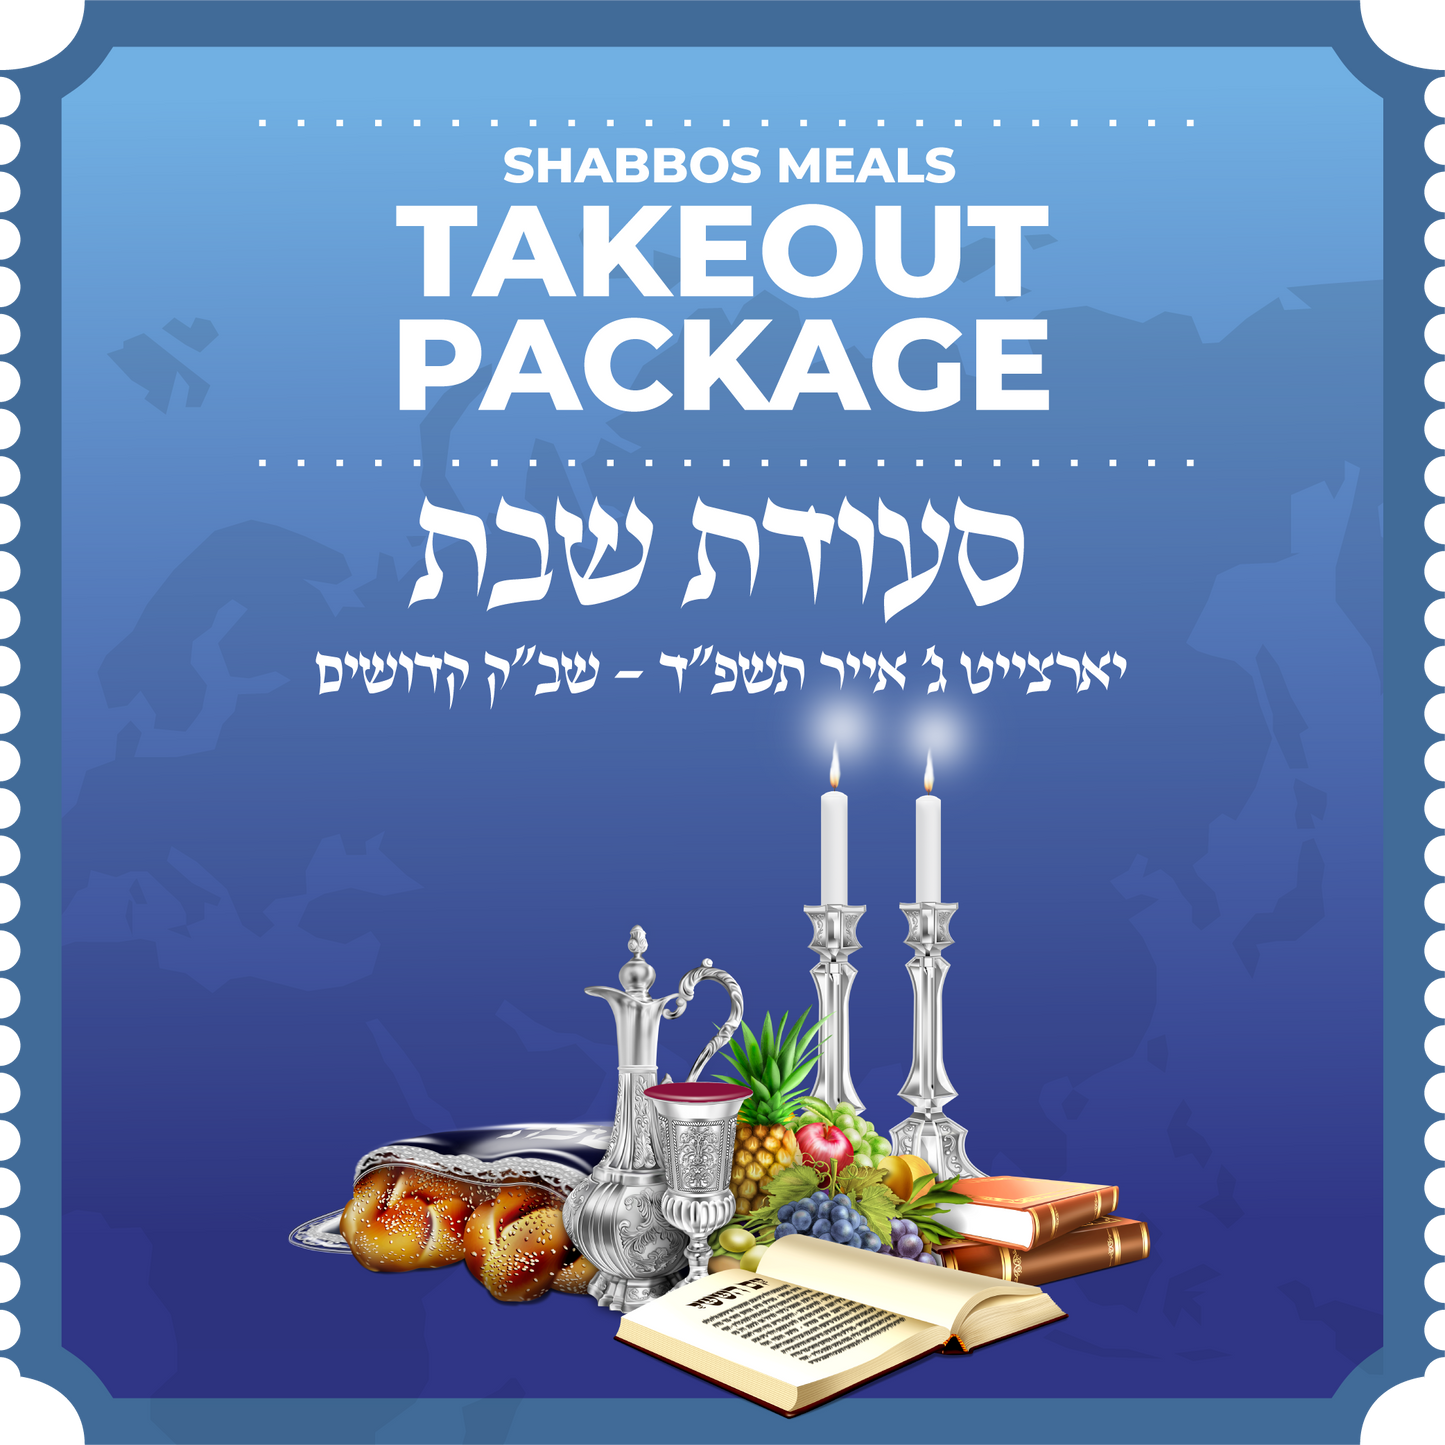 Shabbos Meals Takeout Package